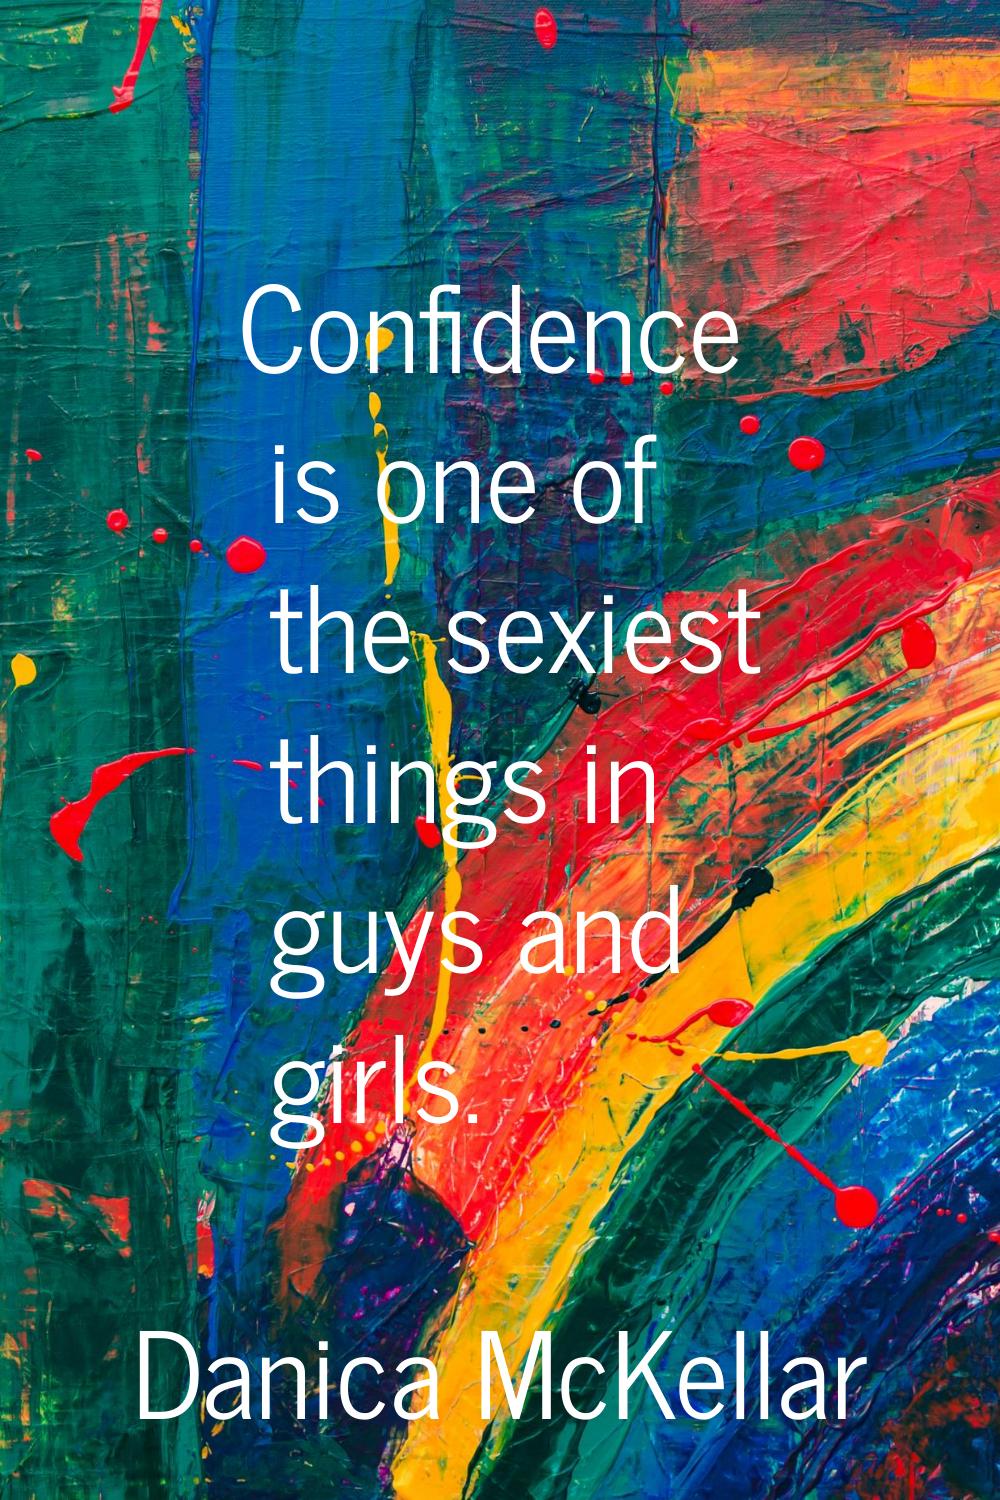 Confidence is one of the sexiest things in guys and girls.